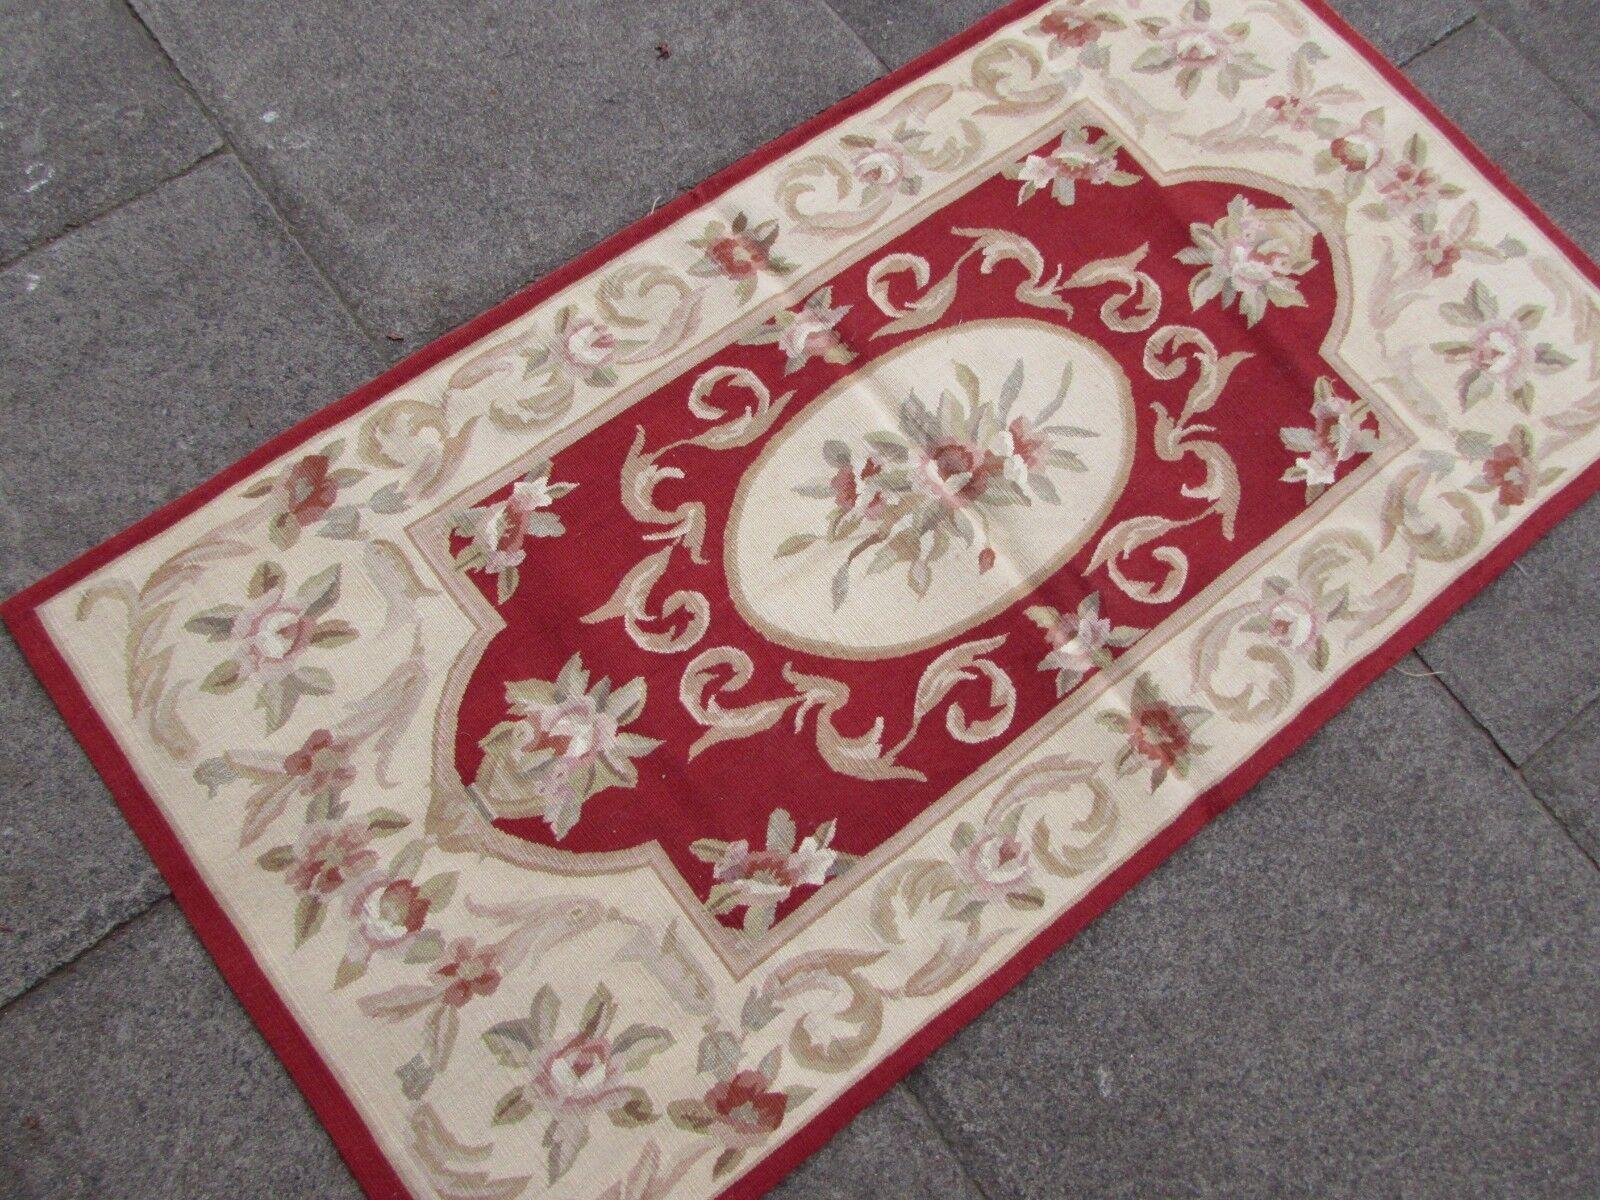 Handmade Vintage French AUbusson Rug 2.4' x 4.7', 1970s - 1Q67 For Sale 6